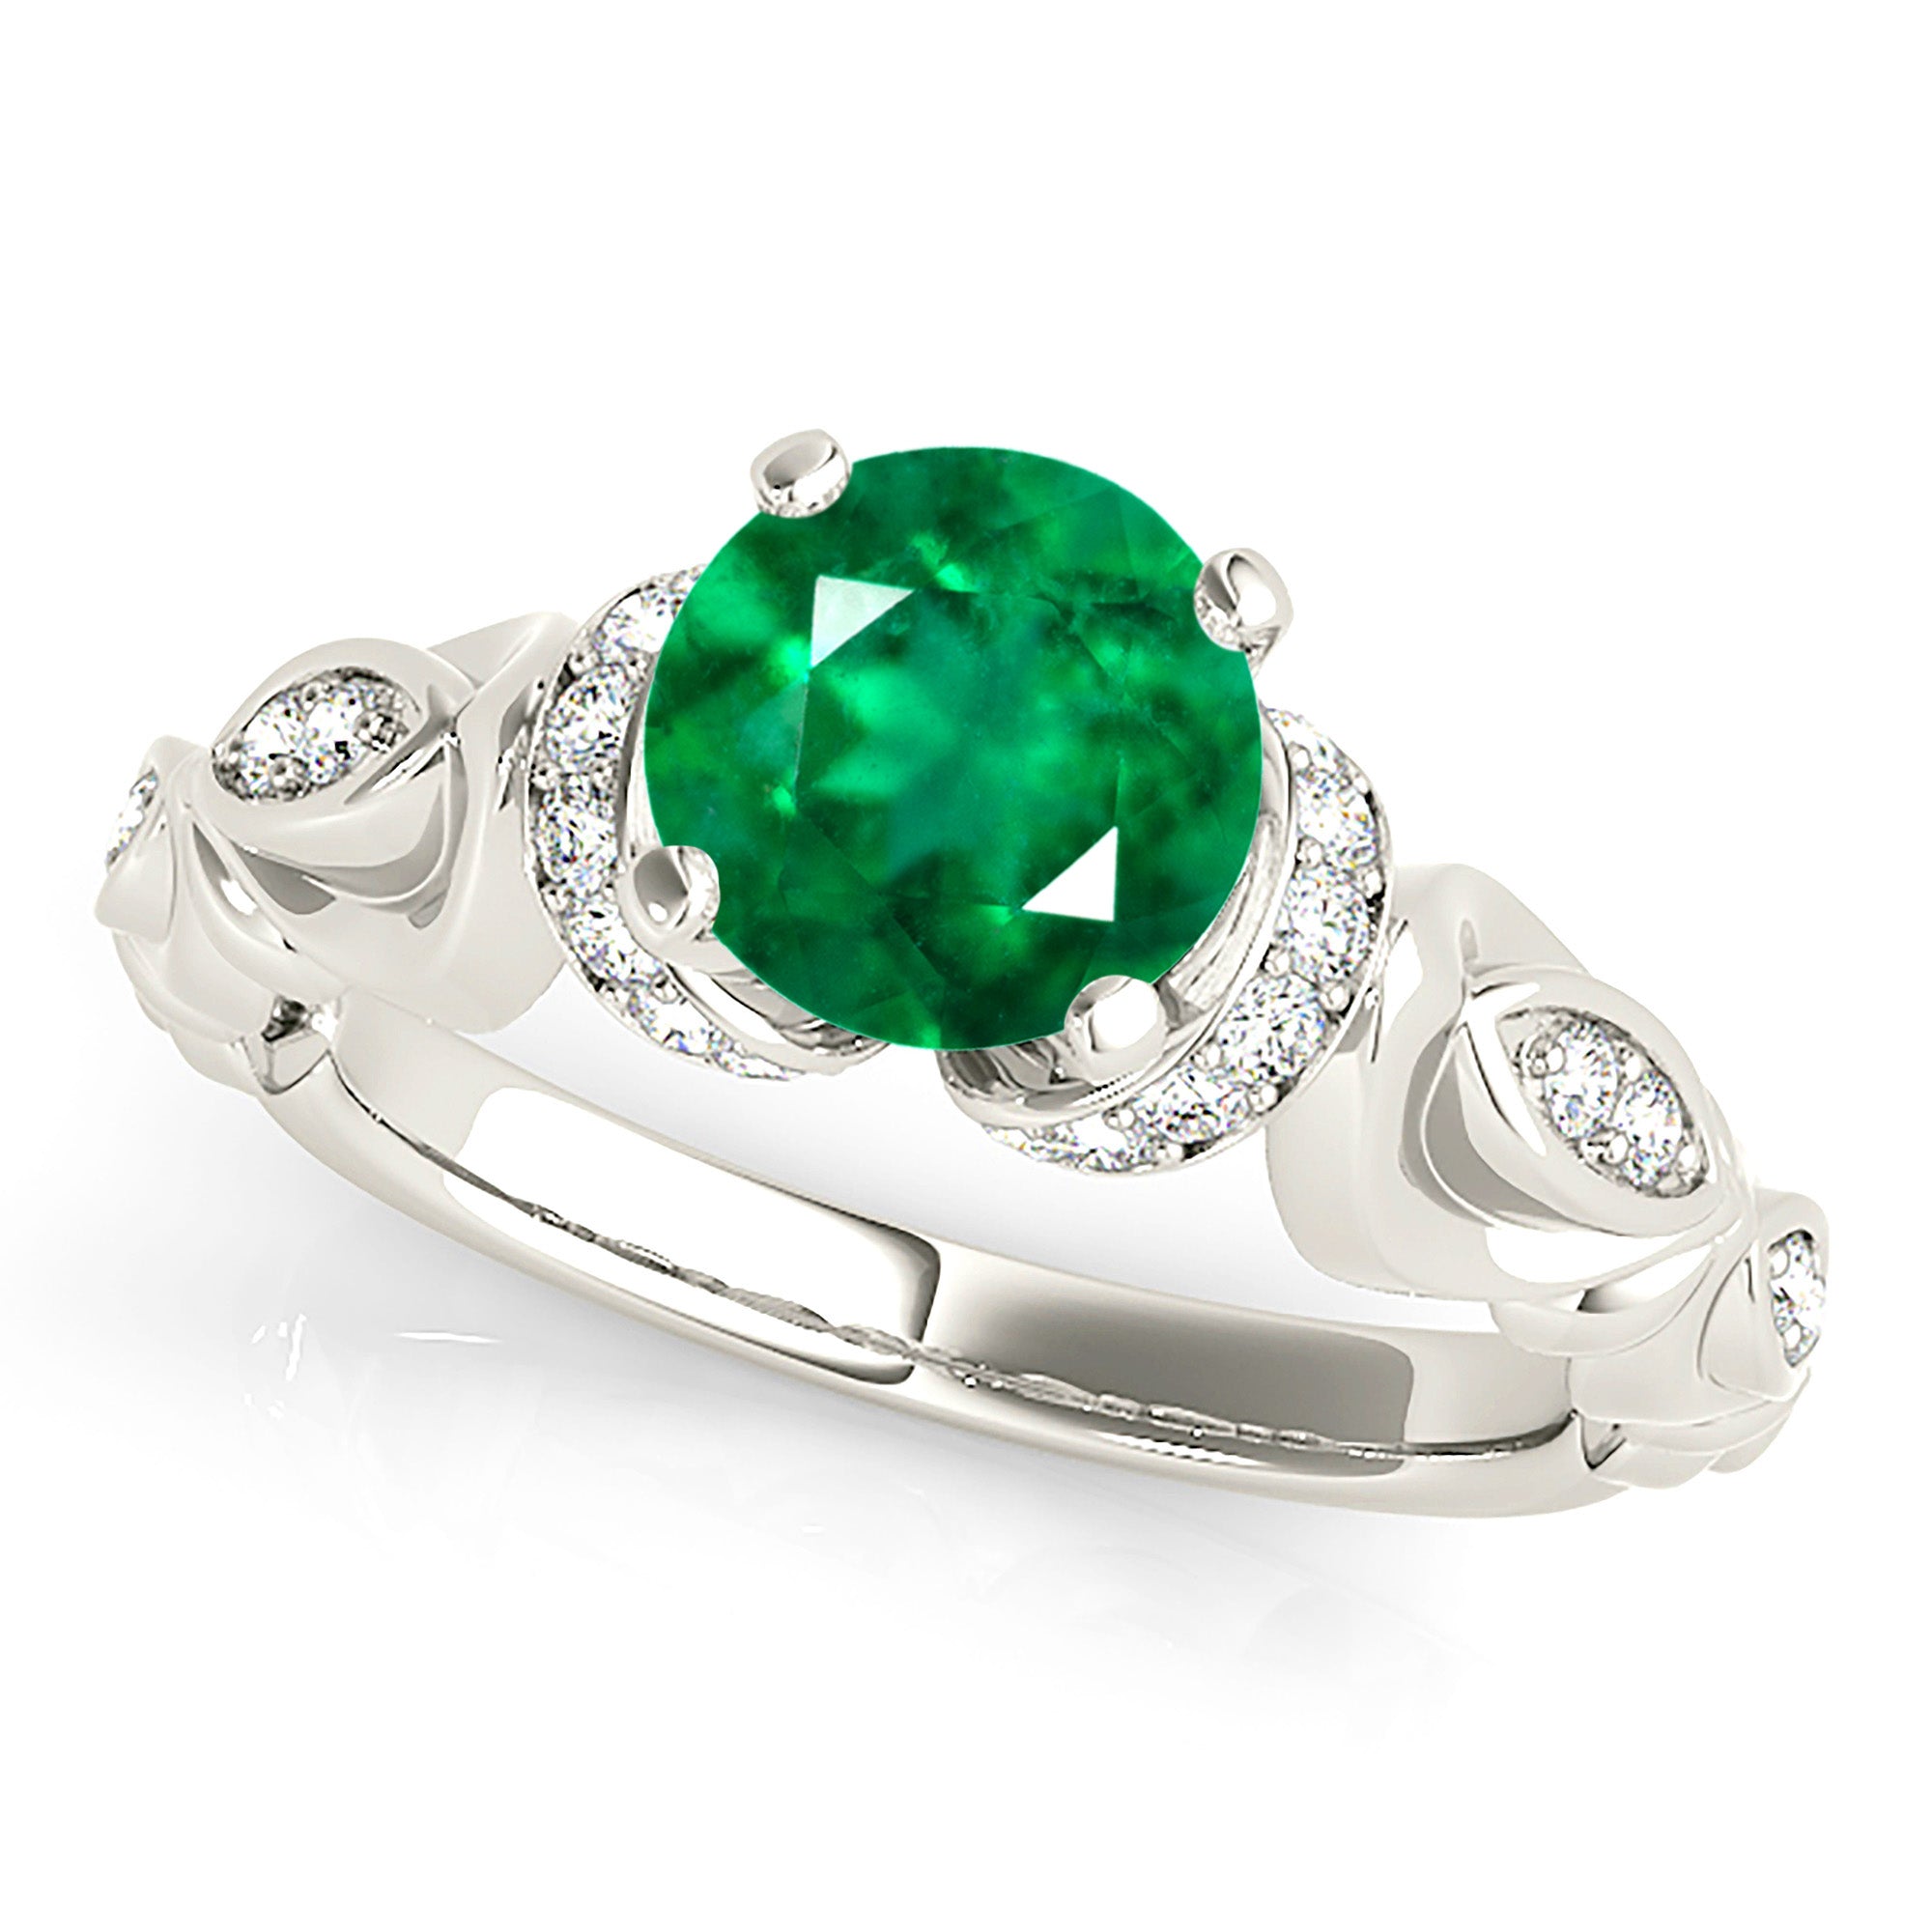 1.75 ct. Genuine Emerald Ring With 0.20 ctw. Side Accent Diamonds,Hand Carved Floral Design-in 14K/18K White, Yellow, Rose Gold and Platinum - Christmas Jewelry Gift -VIRABYANI